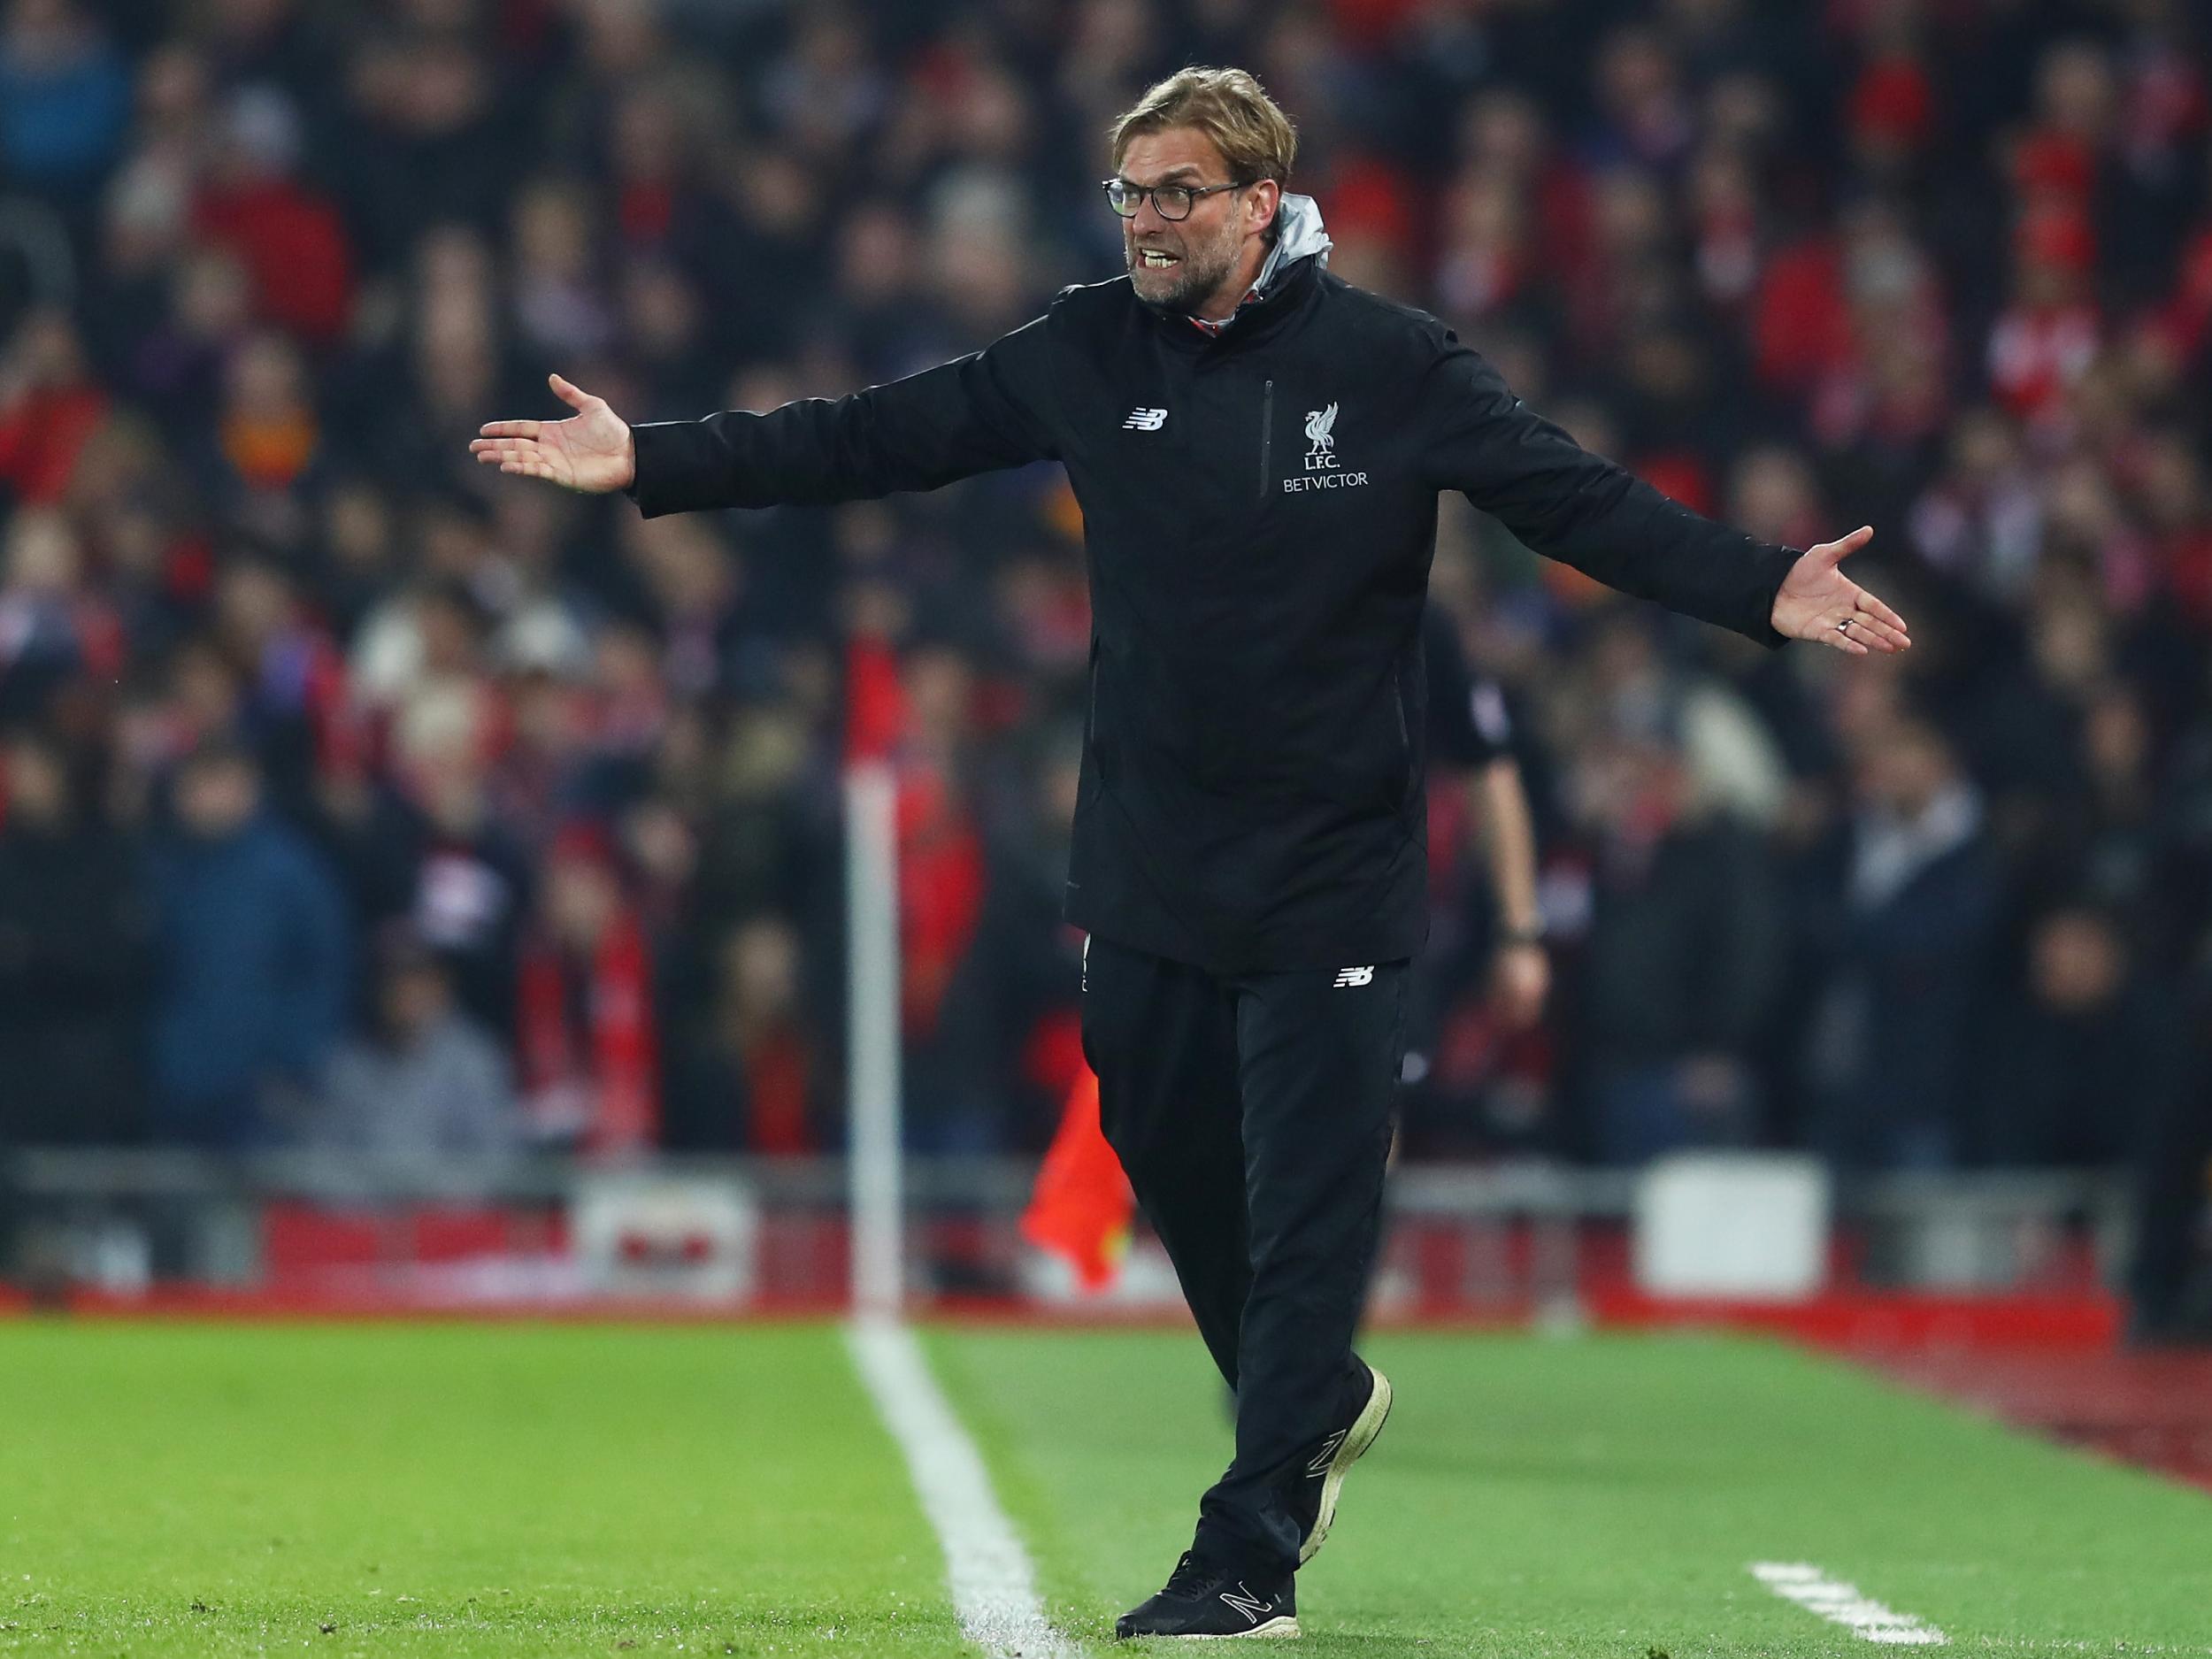 Klopp would rather a good performance rather than winning without knowing how